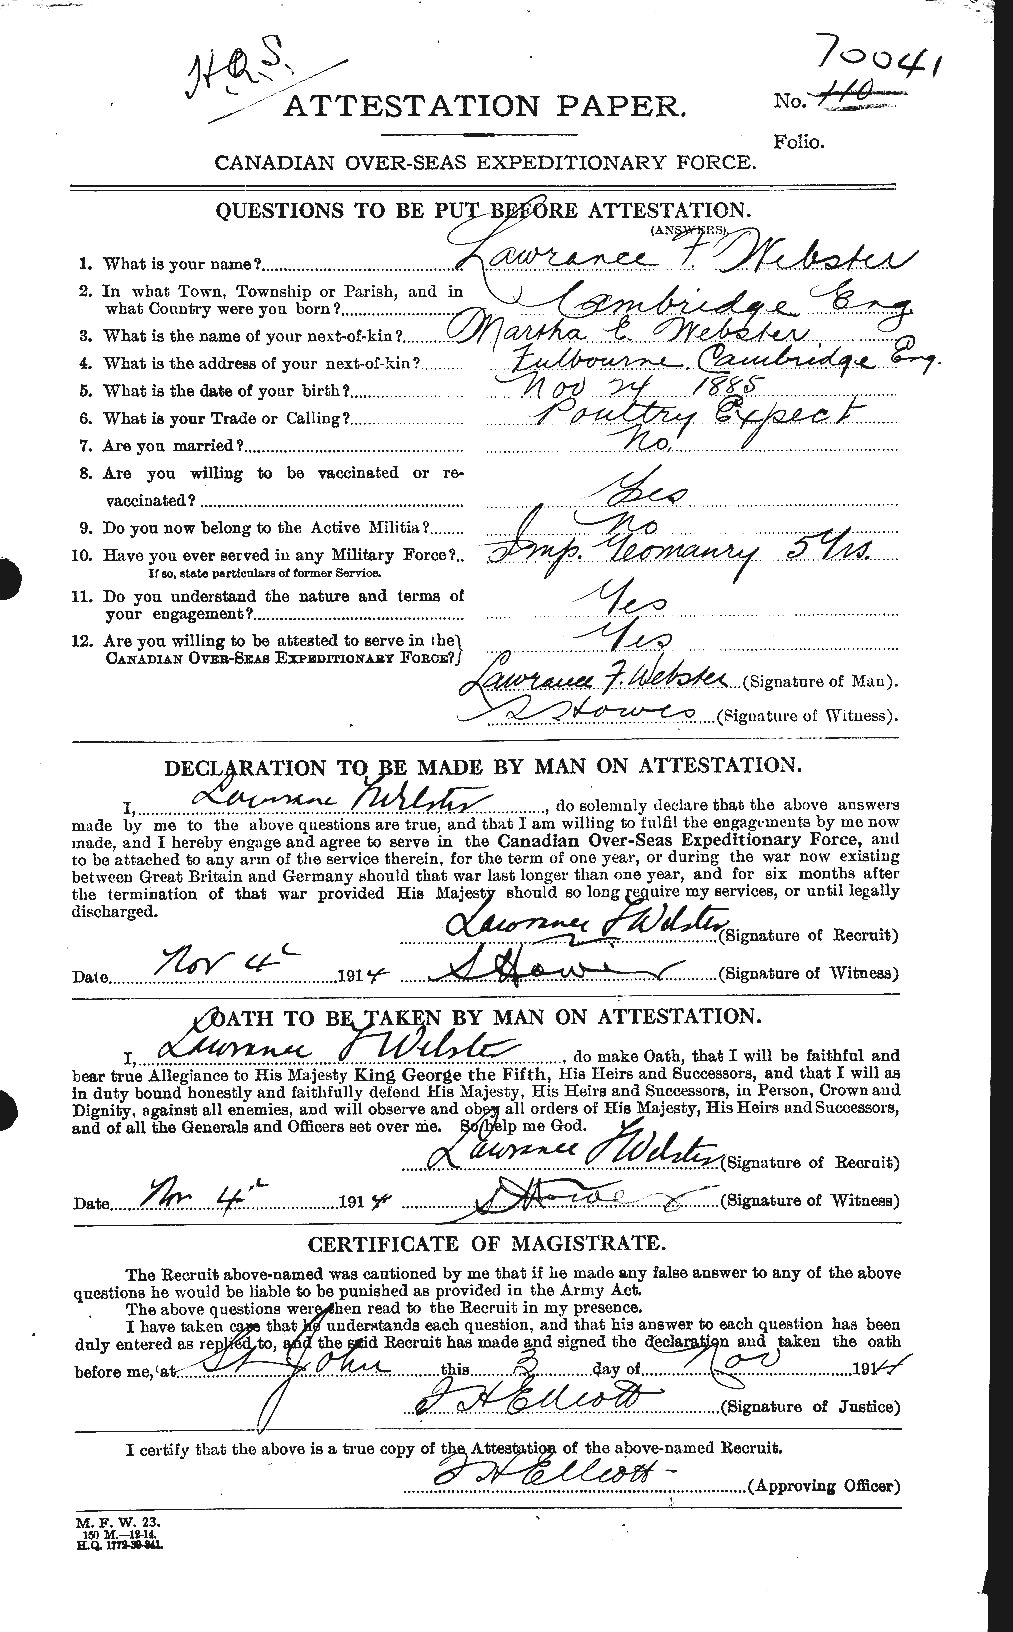 Personnel Records of the First World War - CEF 670509a